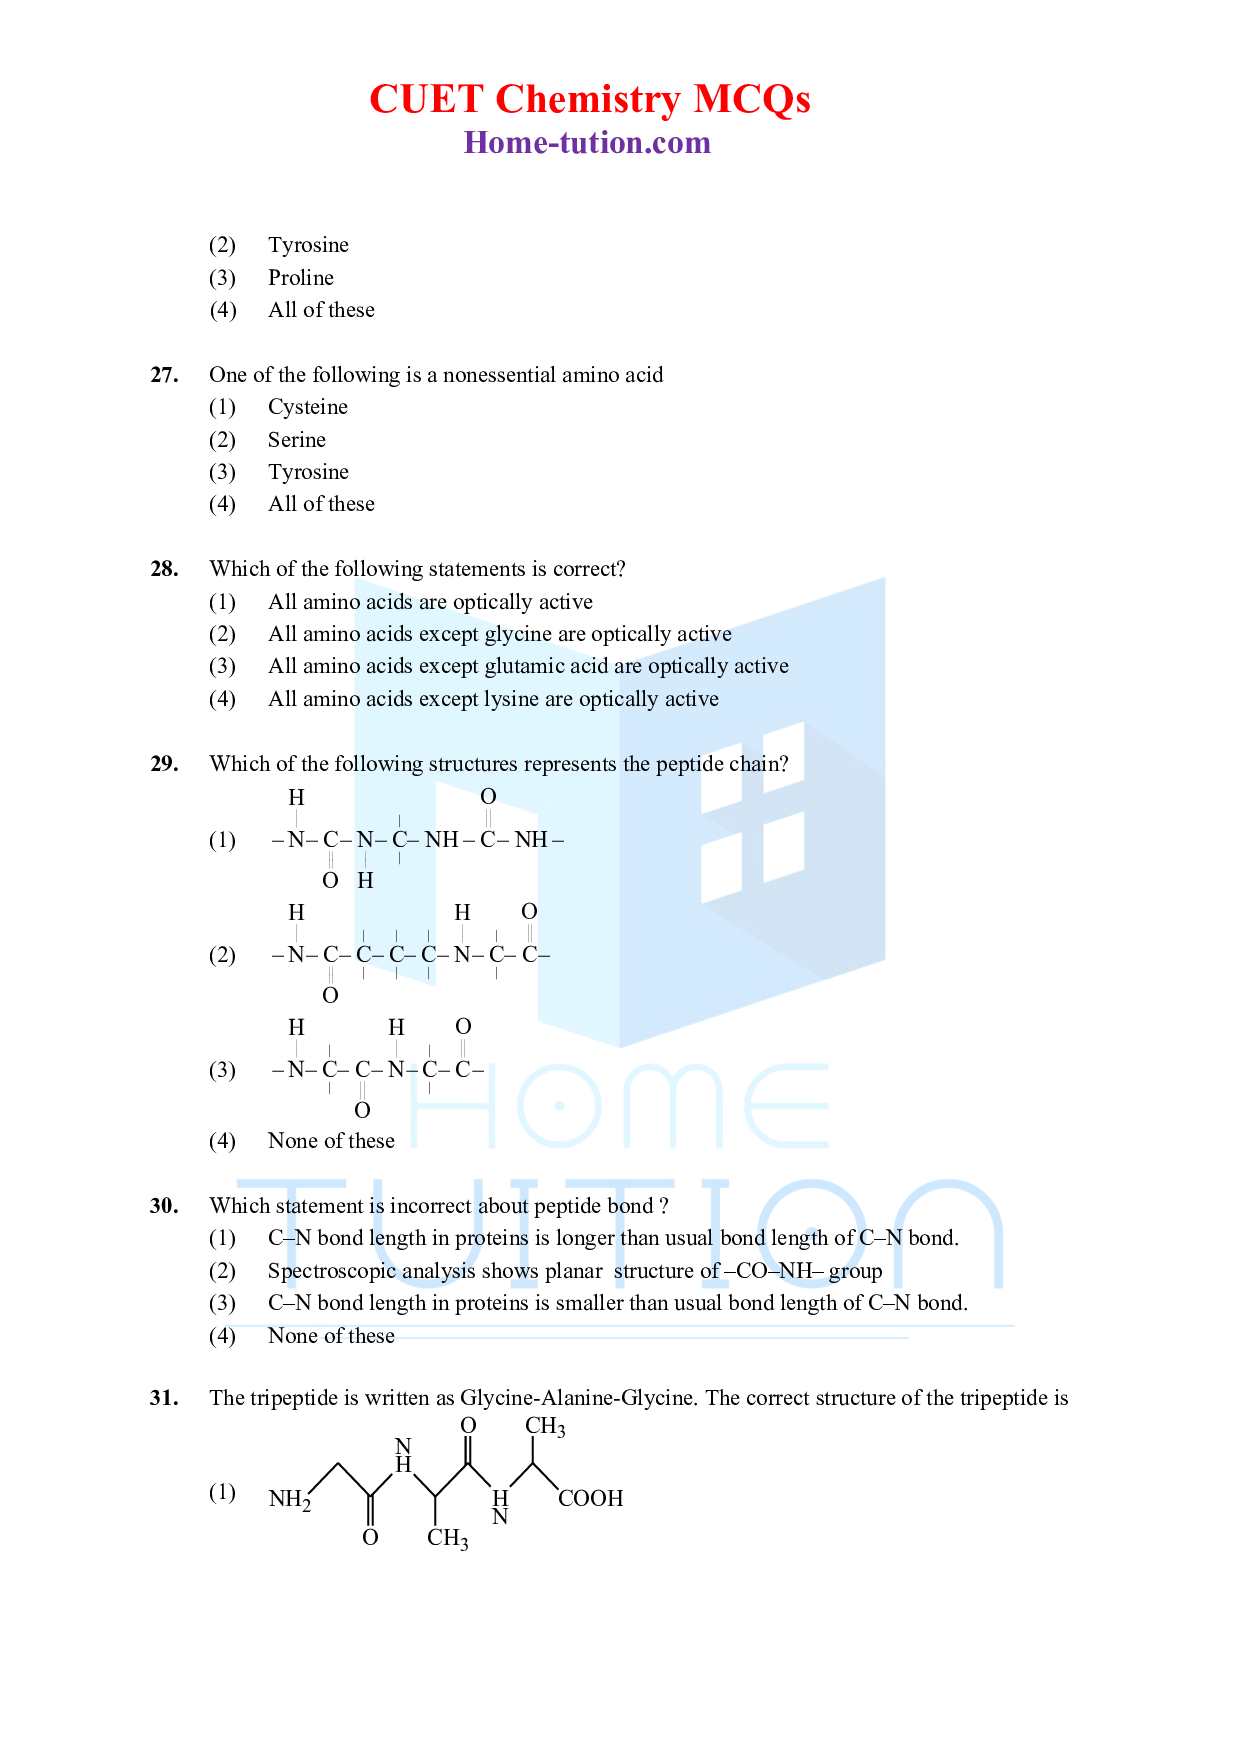 CUET MCQ Questions For Chapter-14 Biomolecules